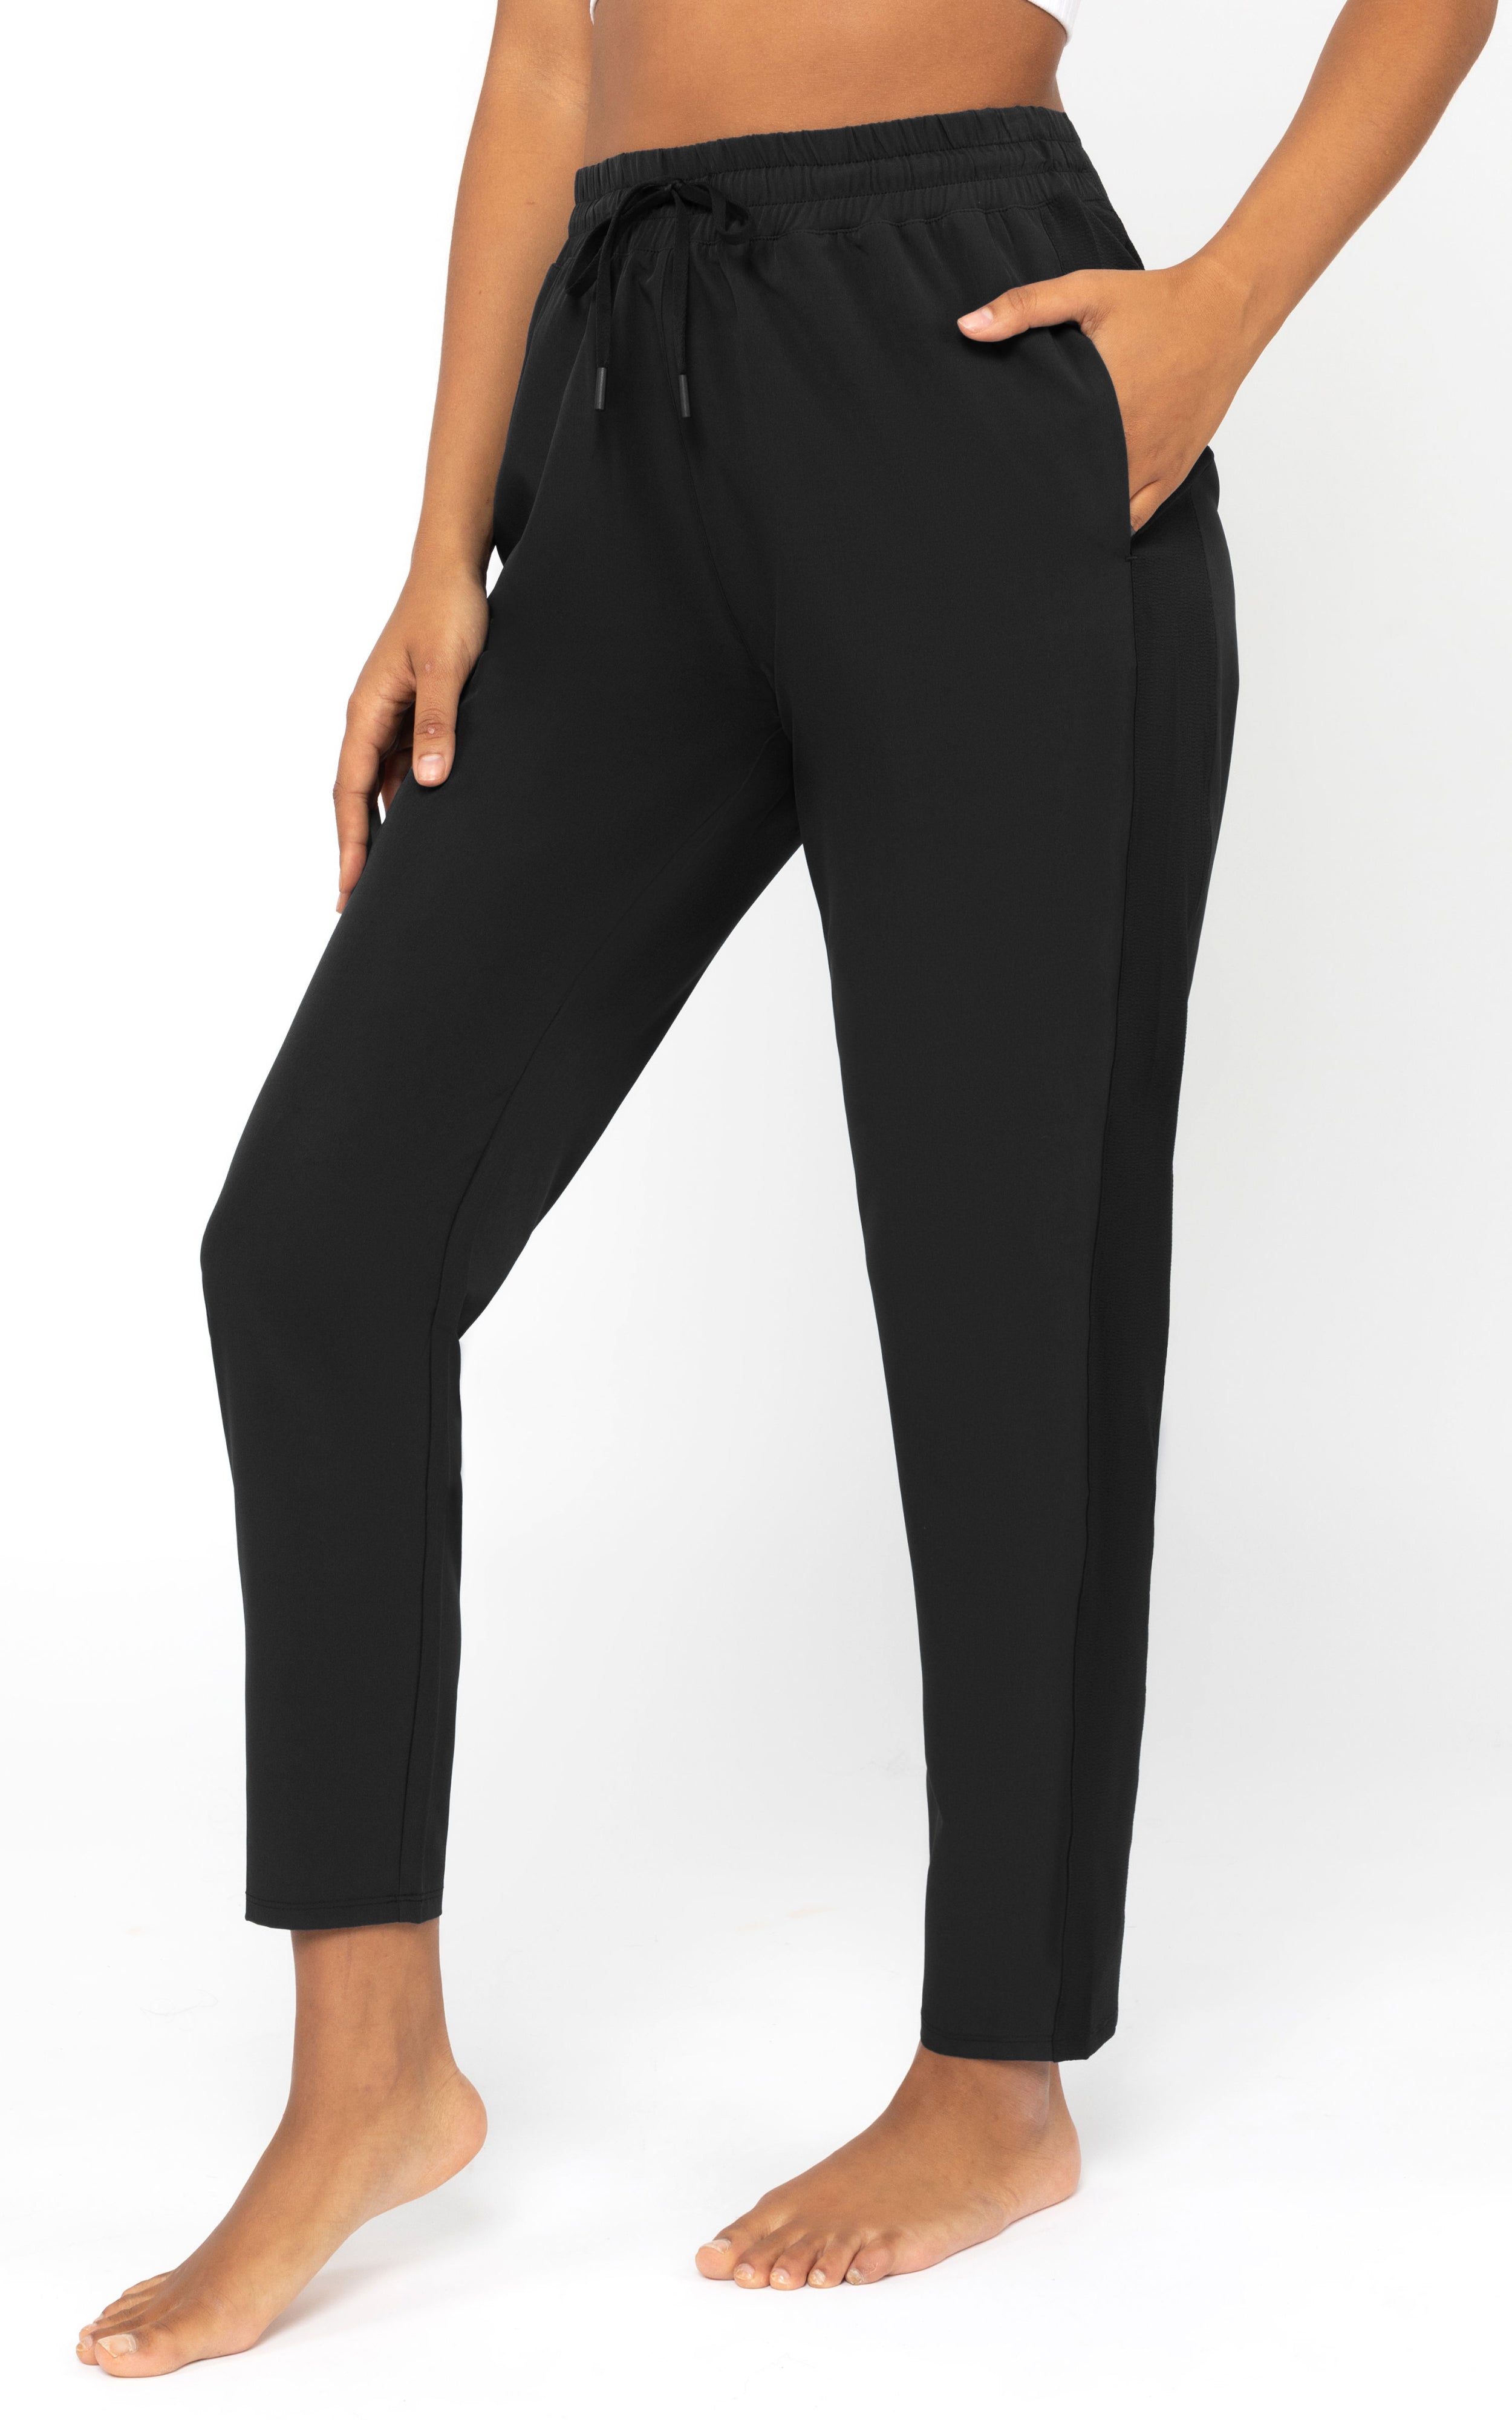 Lightstreme Front Seam Drawstring Pant with Side and Back Pockets